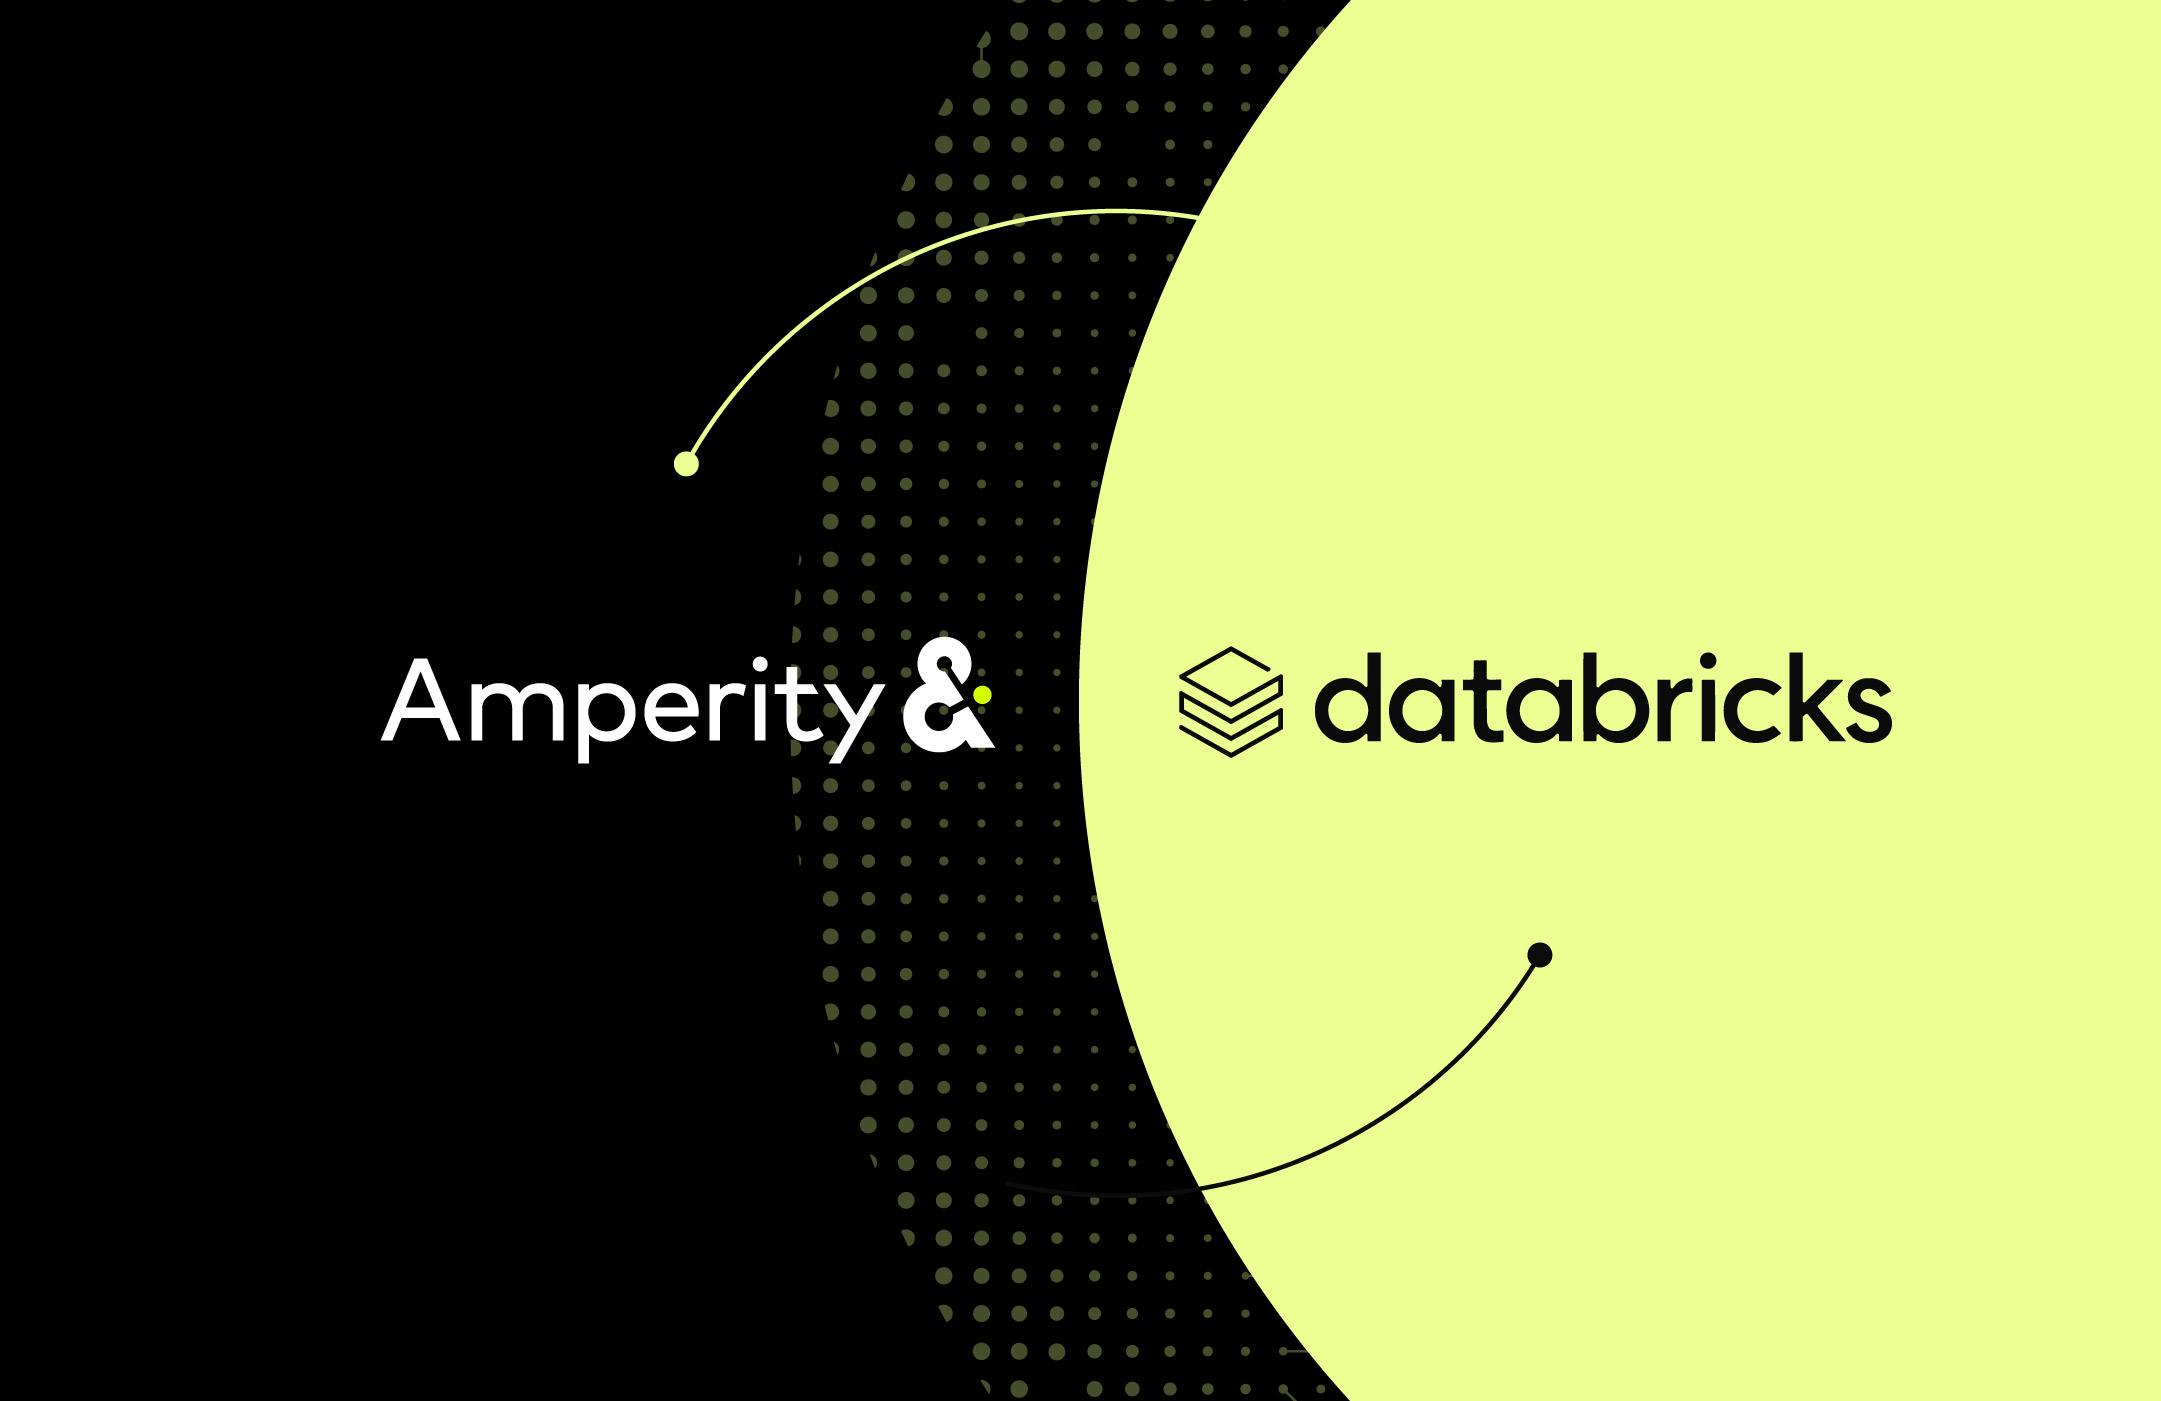 Black image with light yellow circle and the Amperity logo next to the Databricks logo